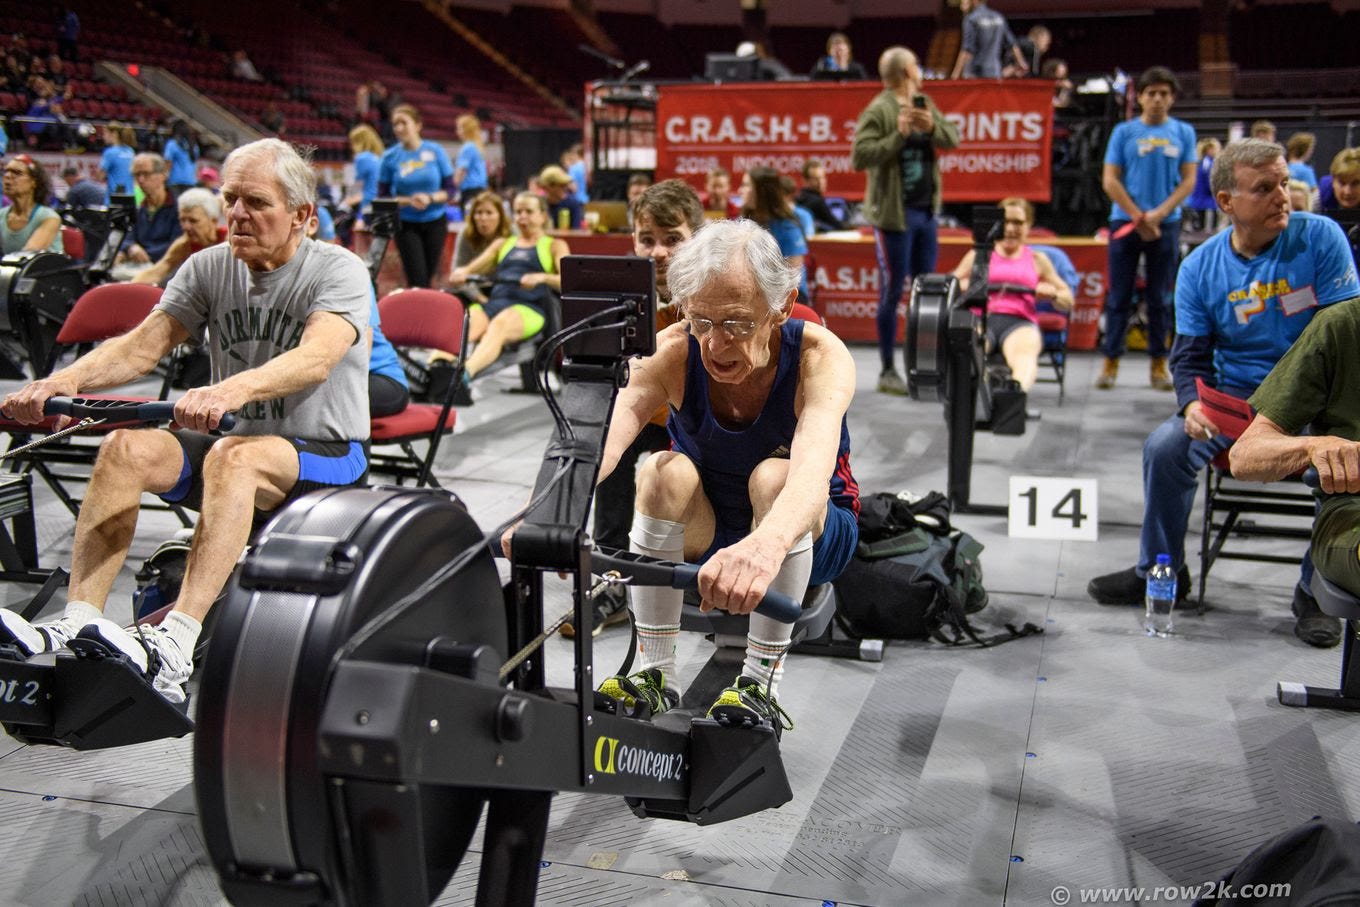 Richard Morgan competes in an indoor rowing competition in 2018. (Row2k.com)